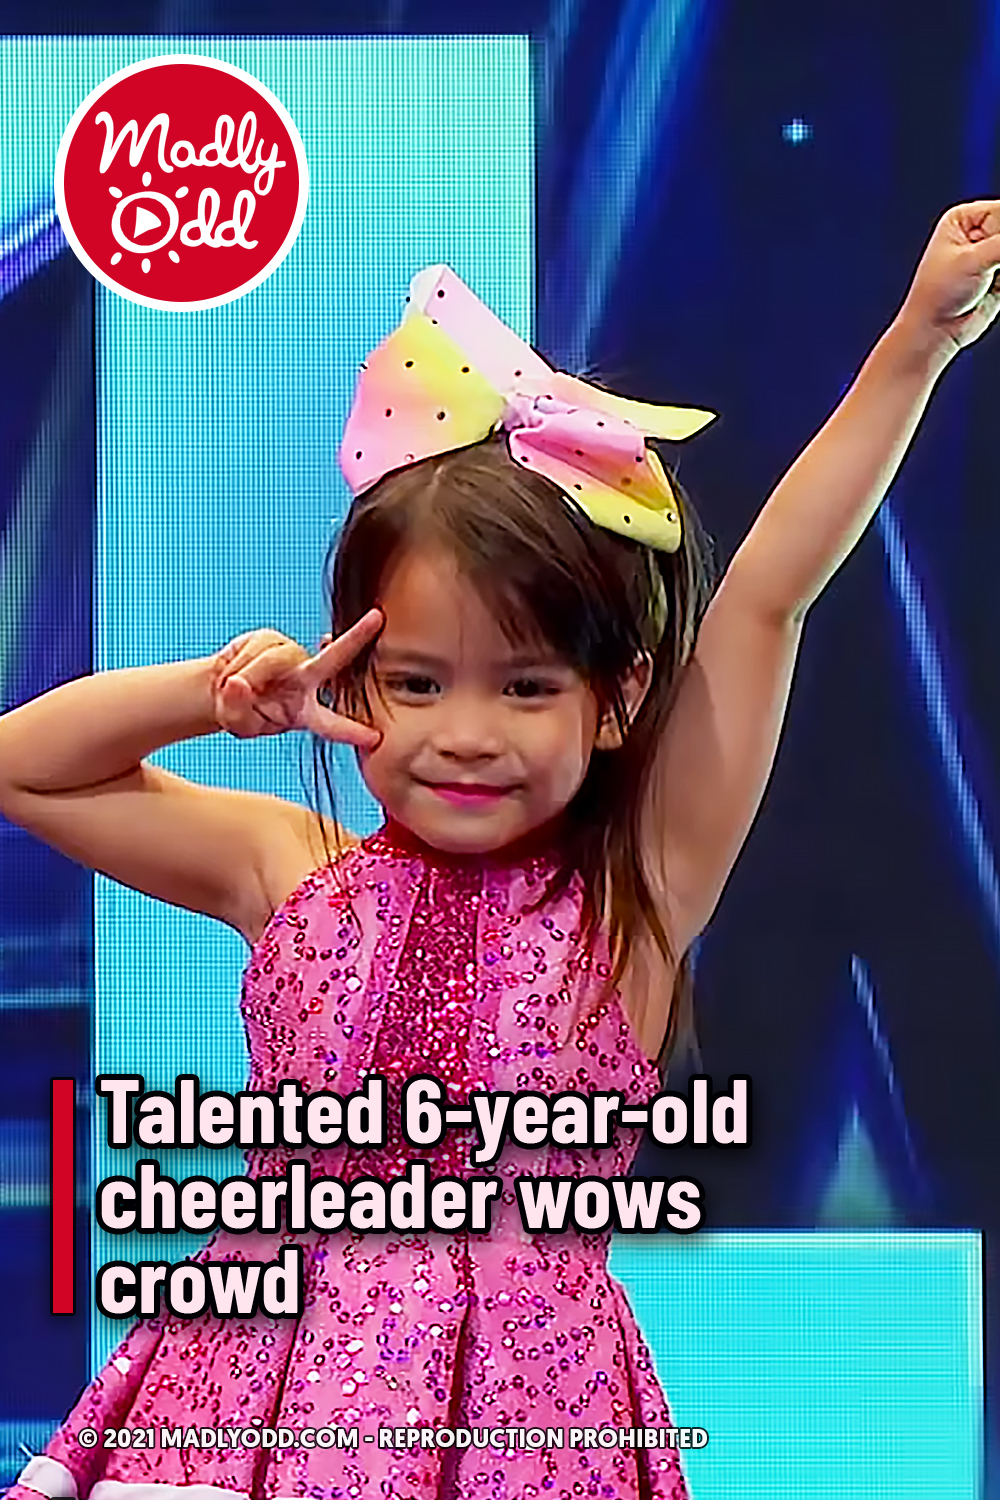 Talented 6-year-old cheerleader wows crowd